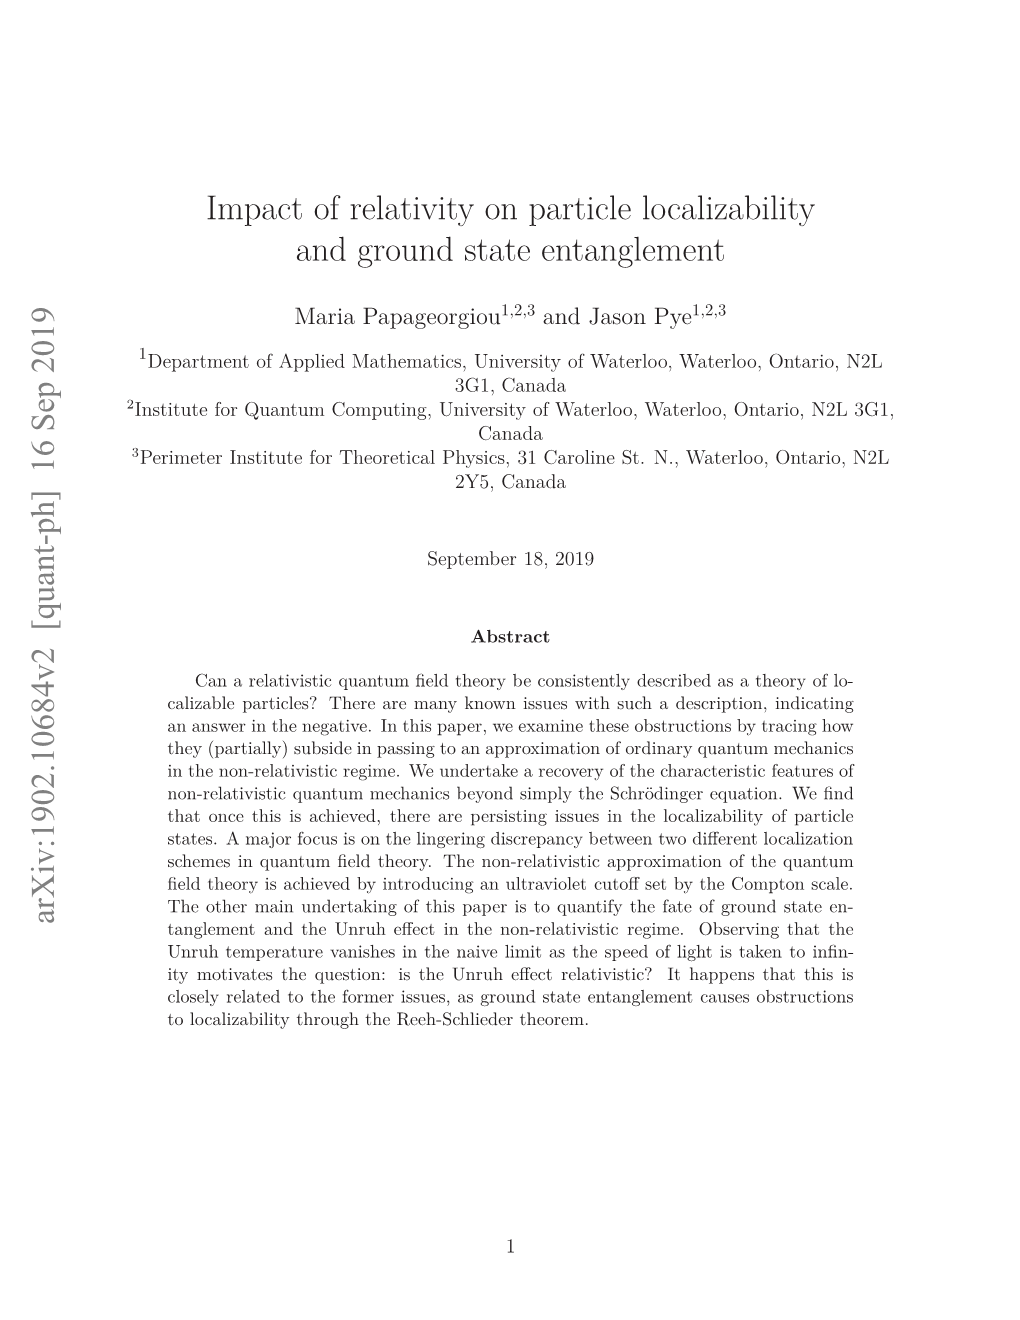 Impact of Relativity on Particle Localizability and Ground State